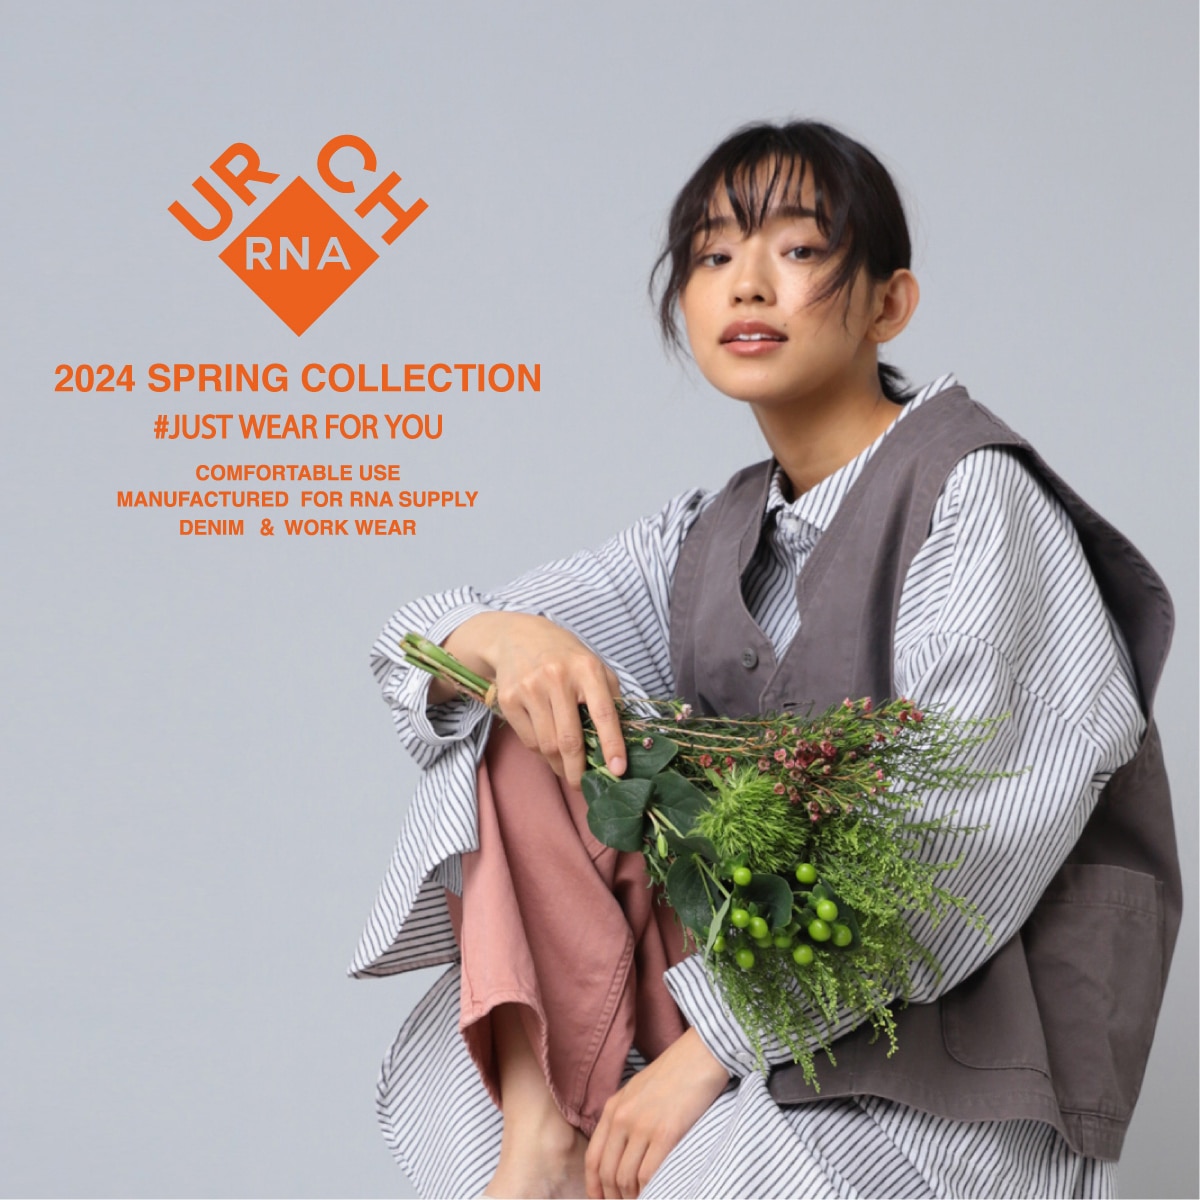 【URCH RNA】SPRING COLLECTION「#JUST WEAR FOR YOU」